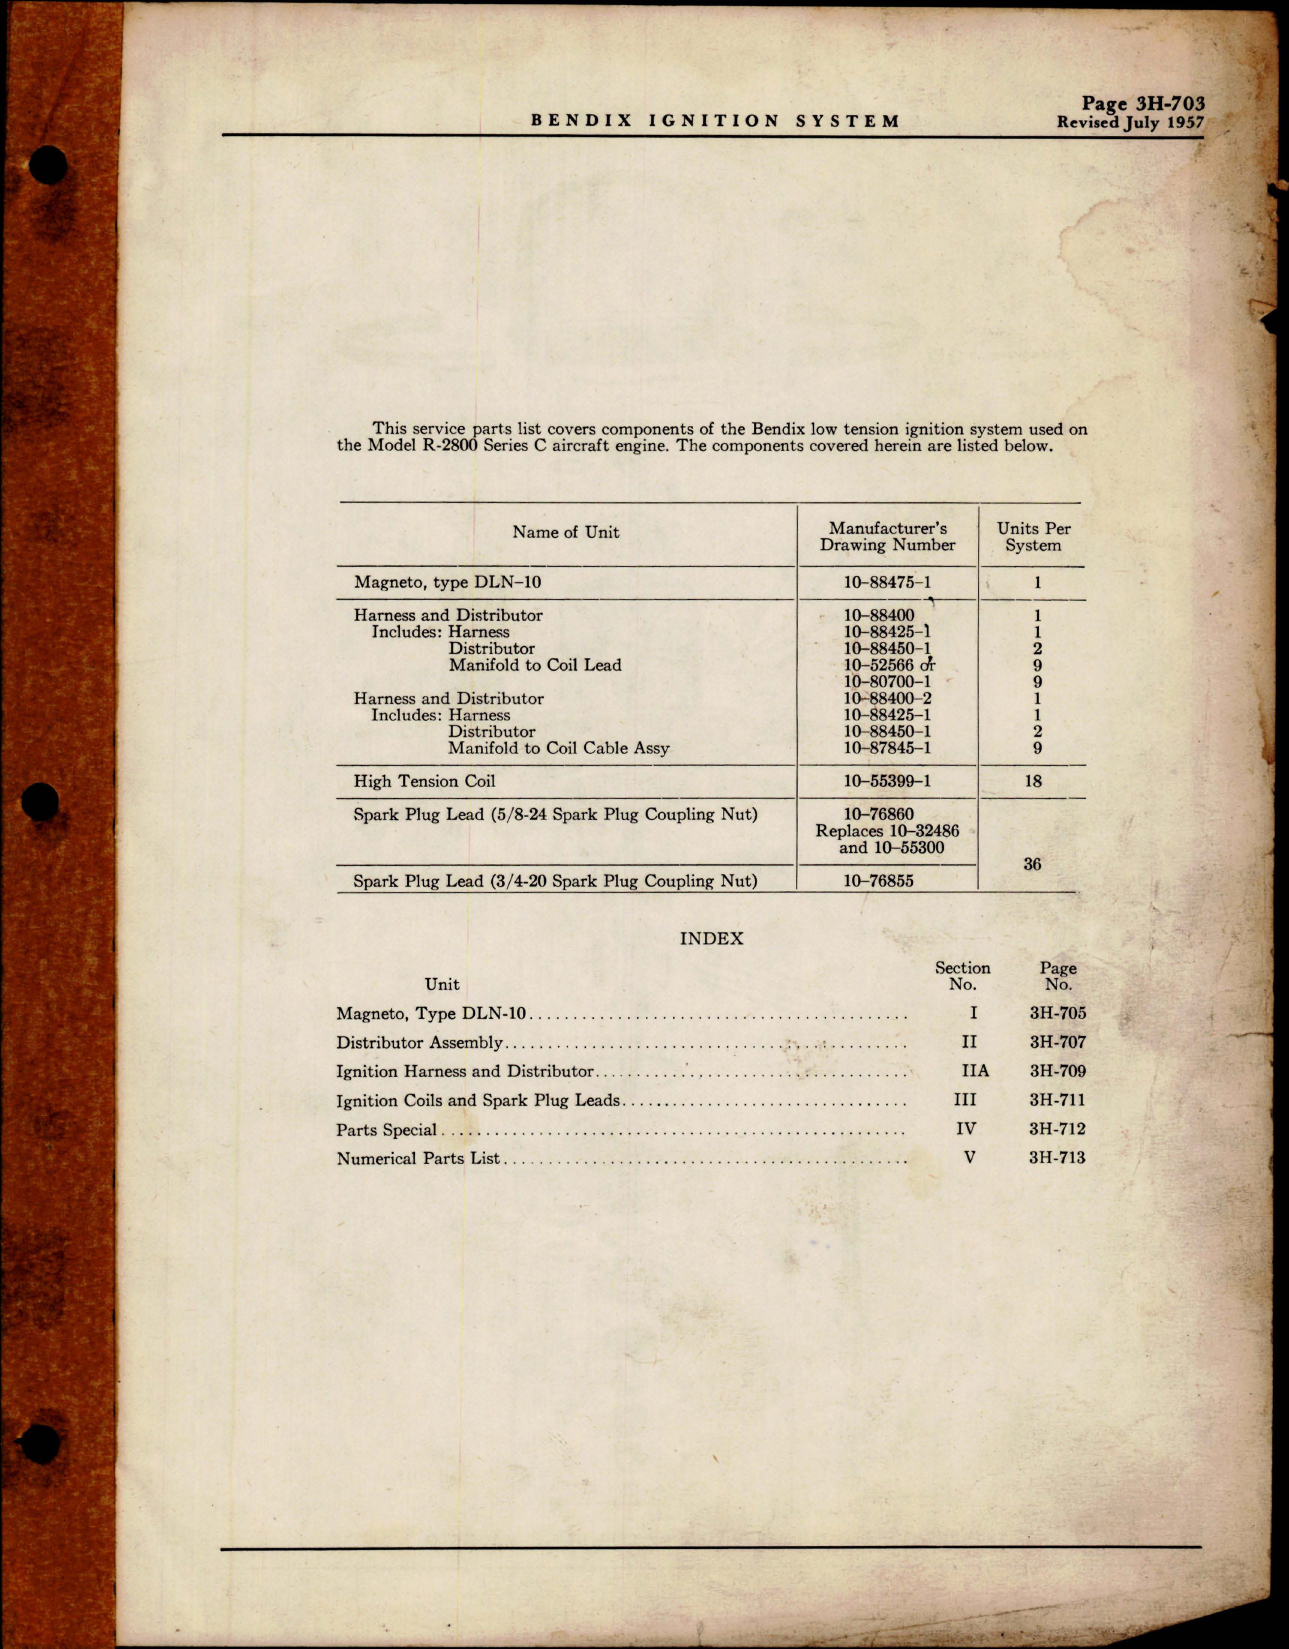 Sample page 5 from AirCorps Library document: Service Parts List for Bendix Low Tension High Altitude Ignition System